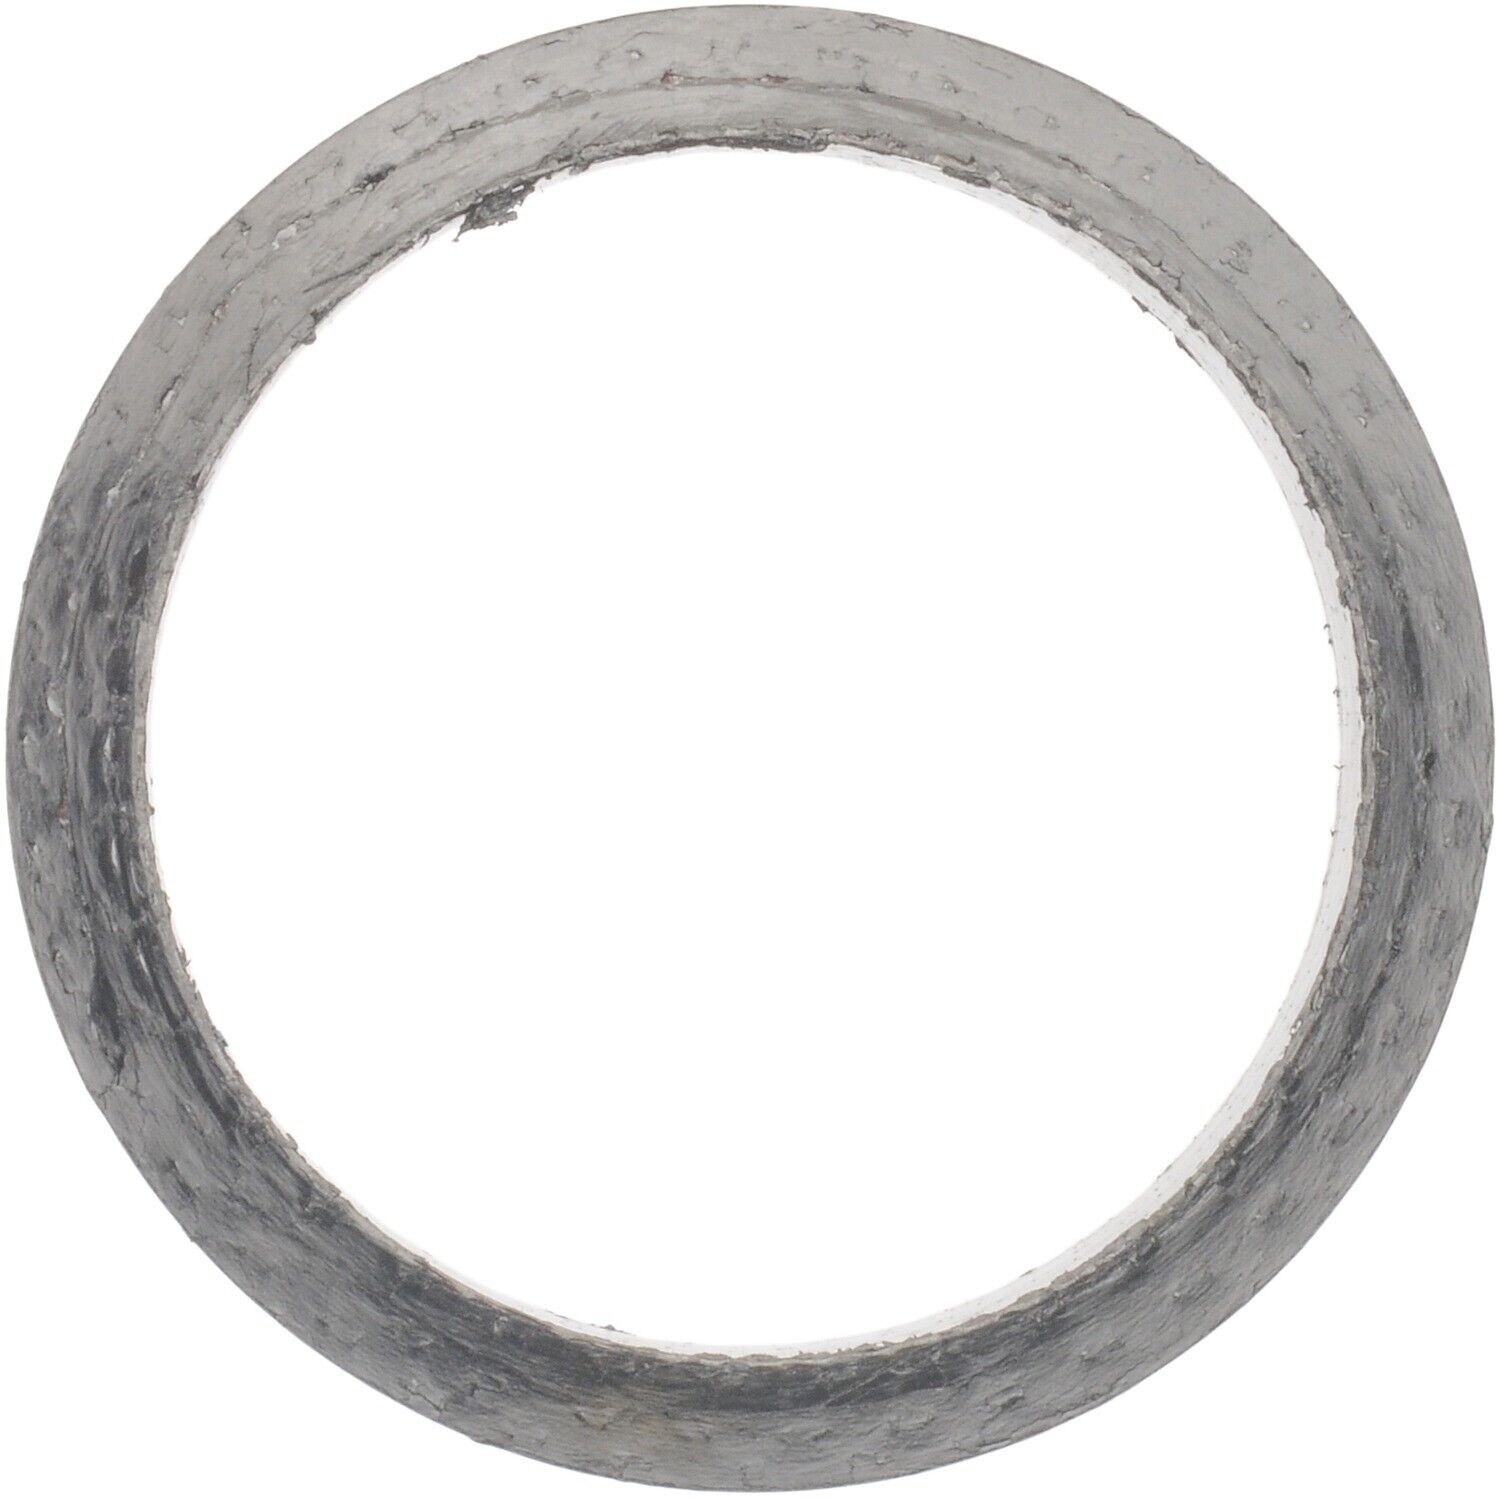 Exhaust Pipe Flange Gasket for El Camino, Caballero, C10+More 71-13610-00